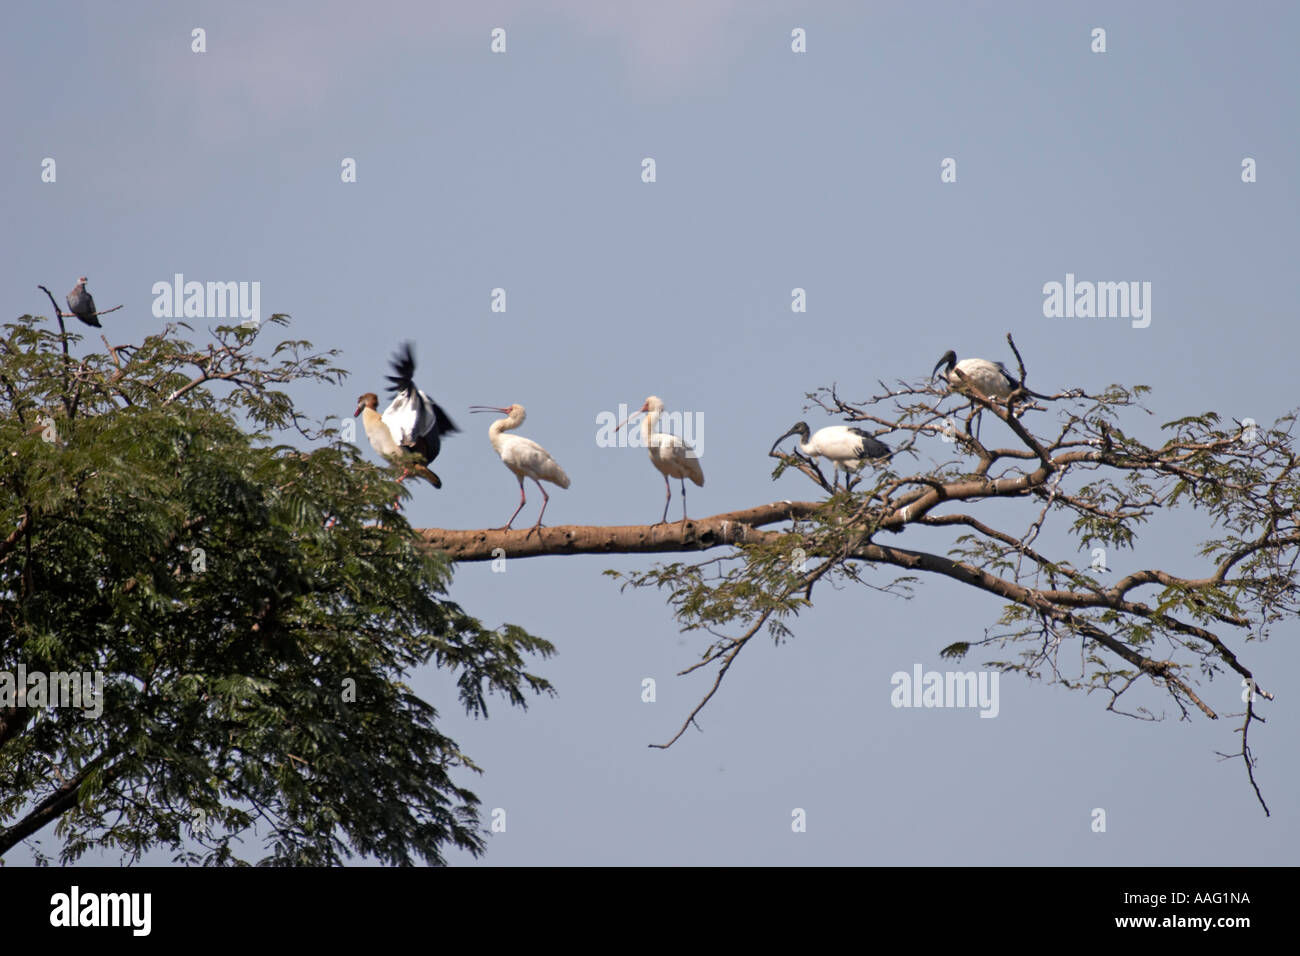 Second Egyptian goose scared away by Spoonbill with Sacred ibis in a tree near Kuch Ethiopia Africa Stock Photo